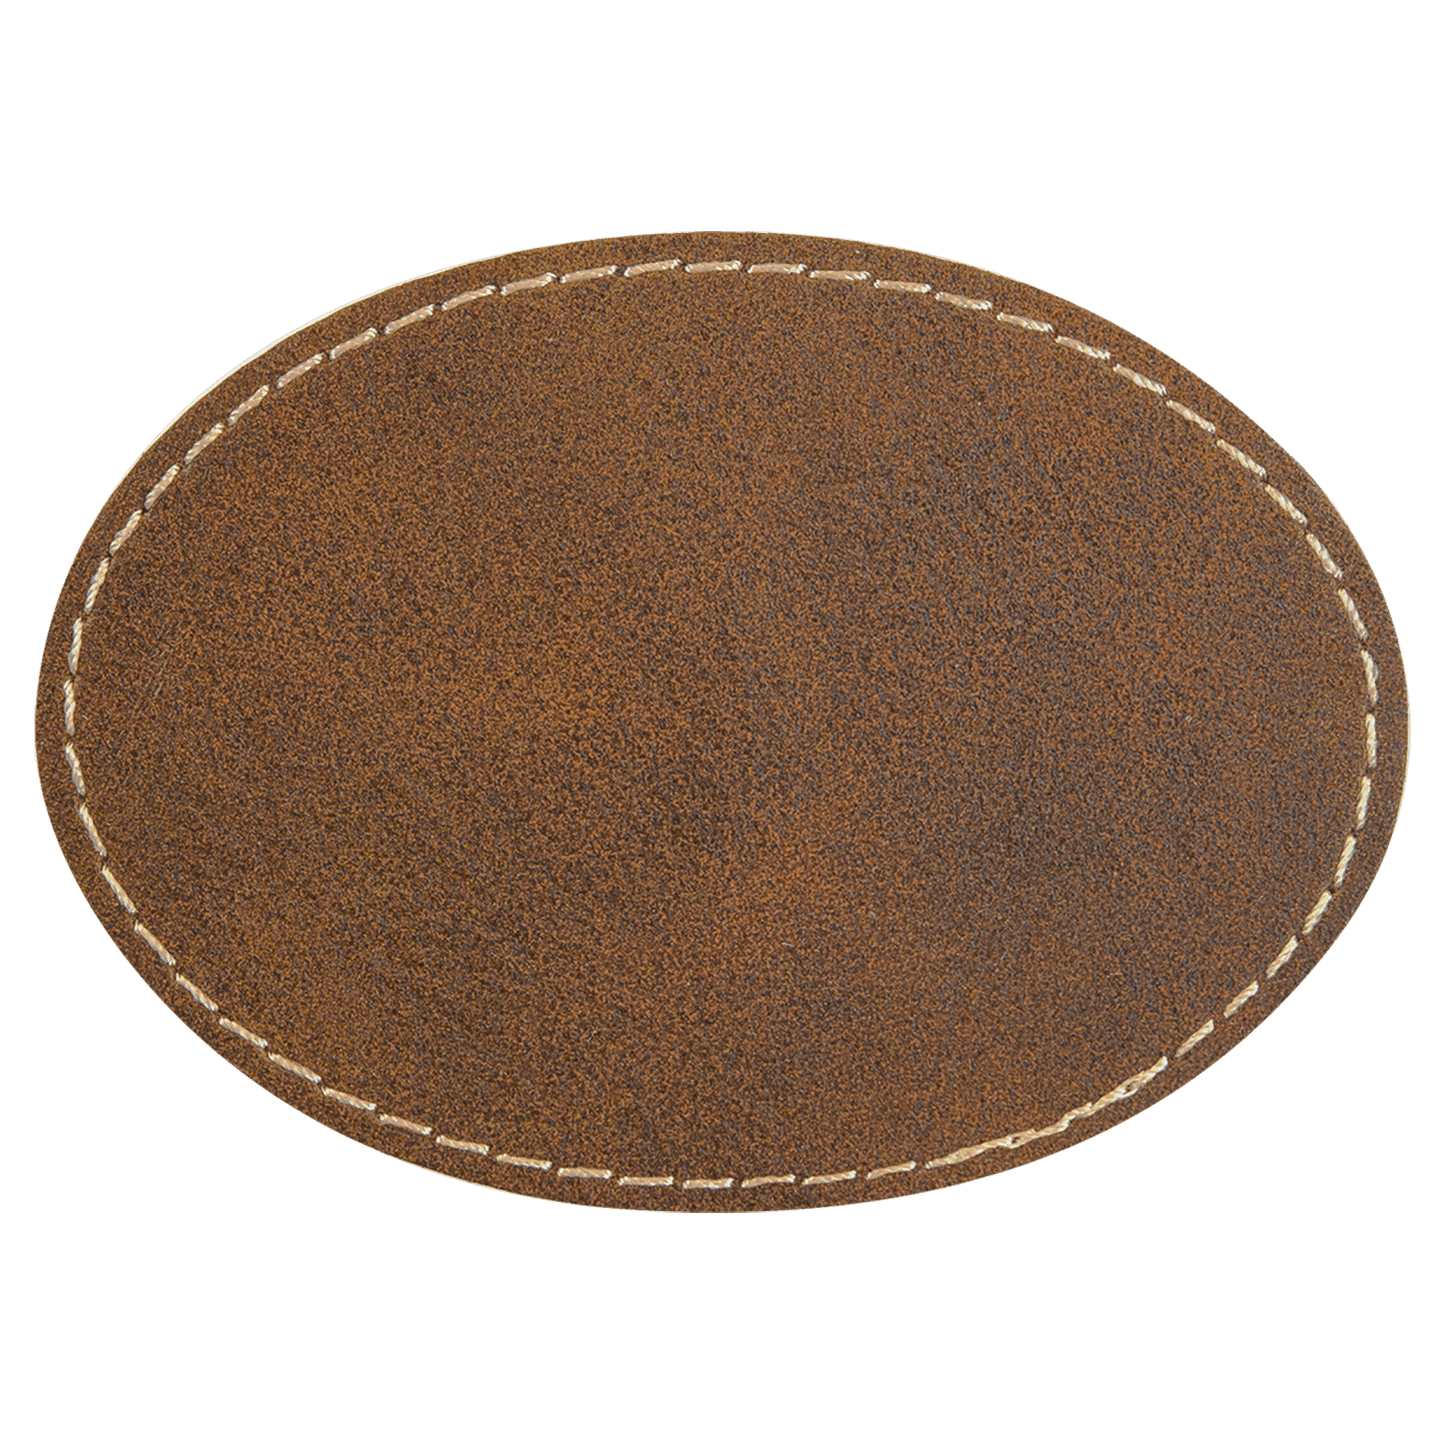 Oval Laserable Leatherette Patch with Adhesive (3 1/2" x 2 1/2" Oval or 3" x 2" Oval)